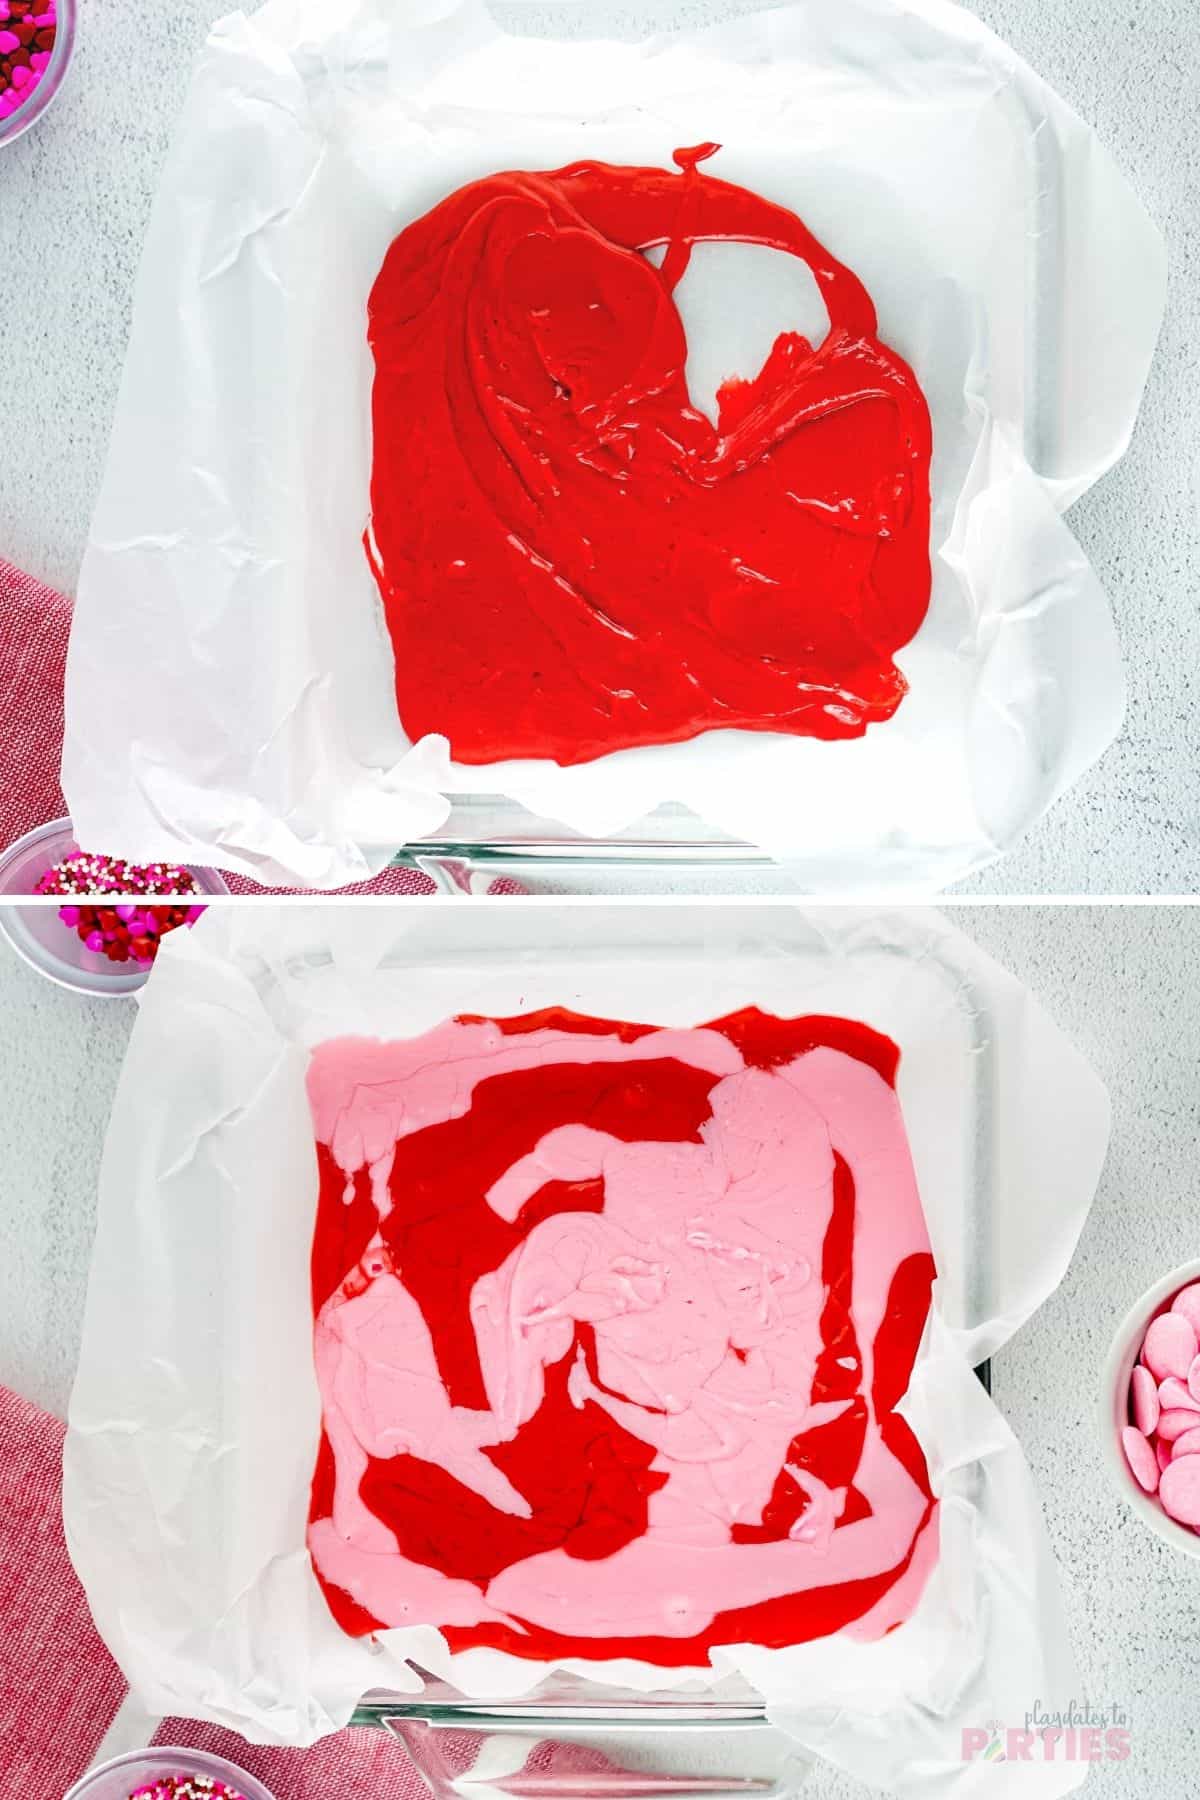 Making layered fudge with candy melts.